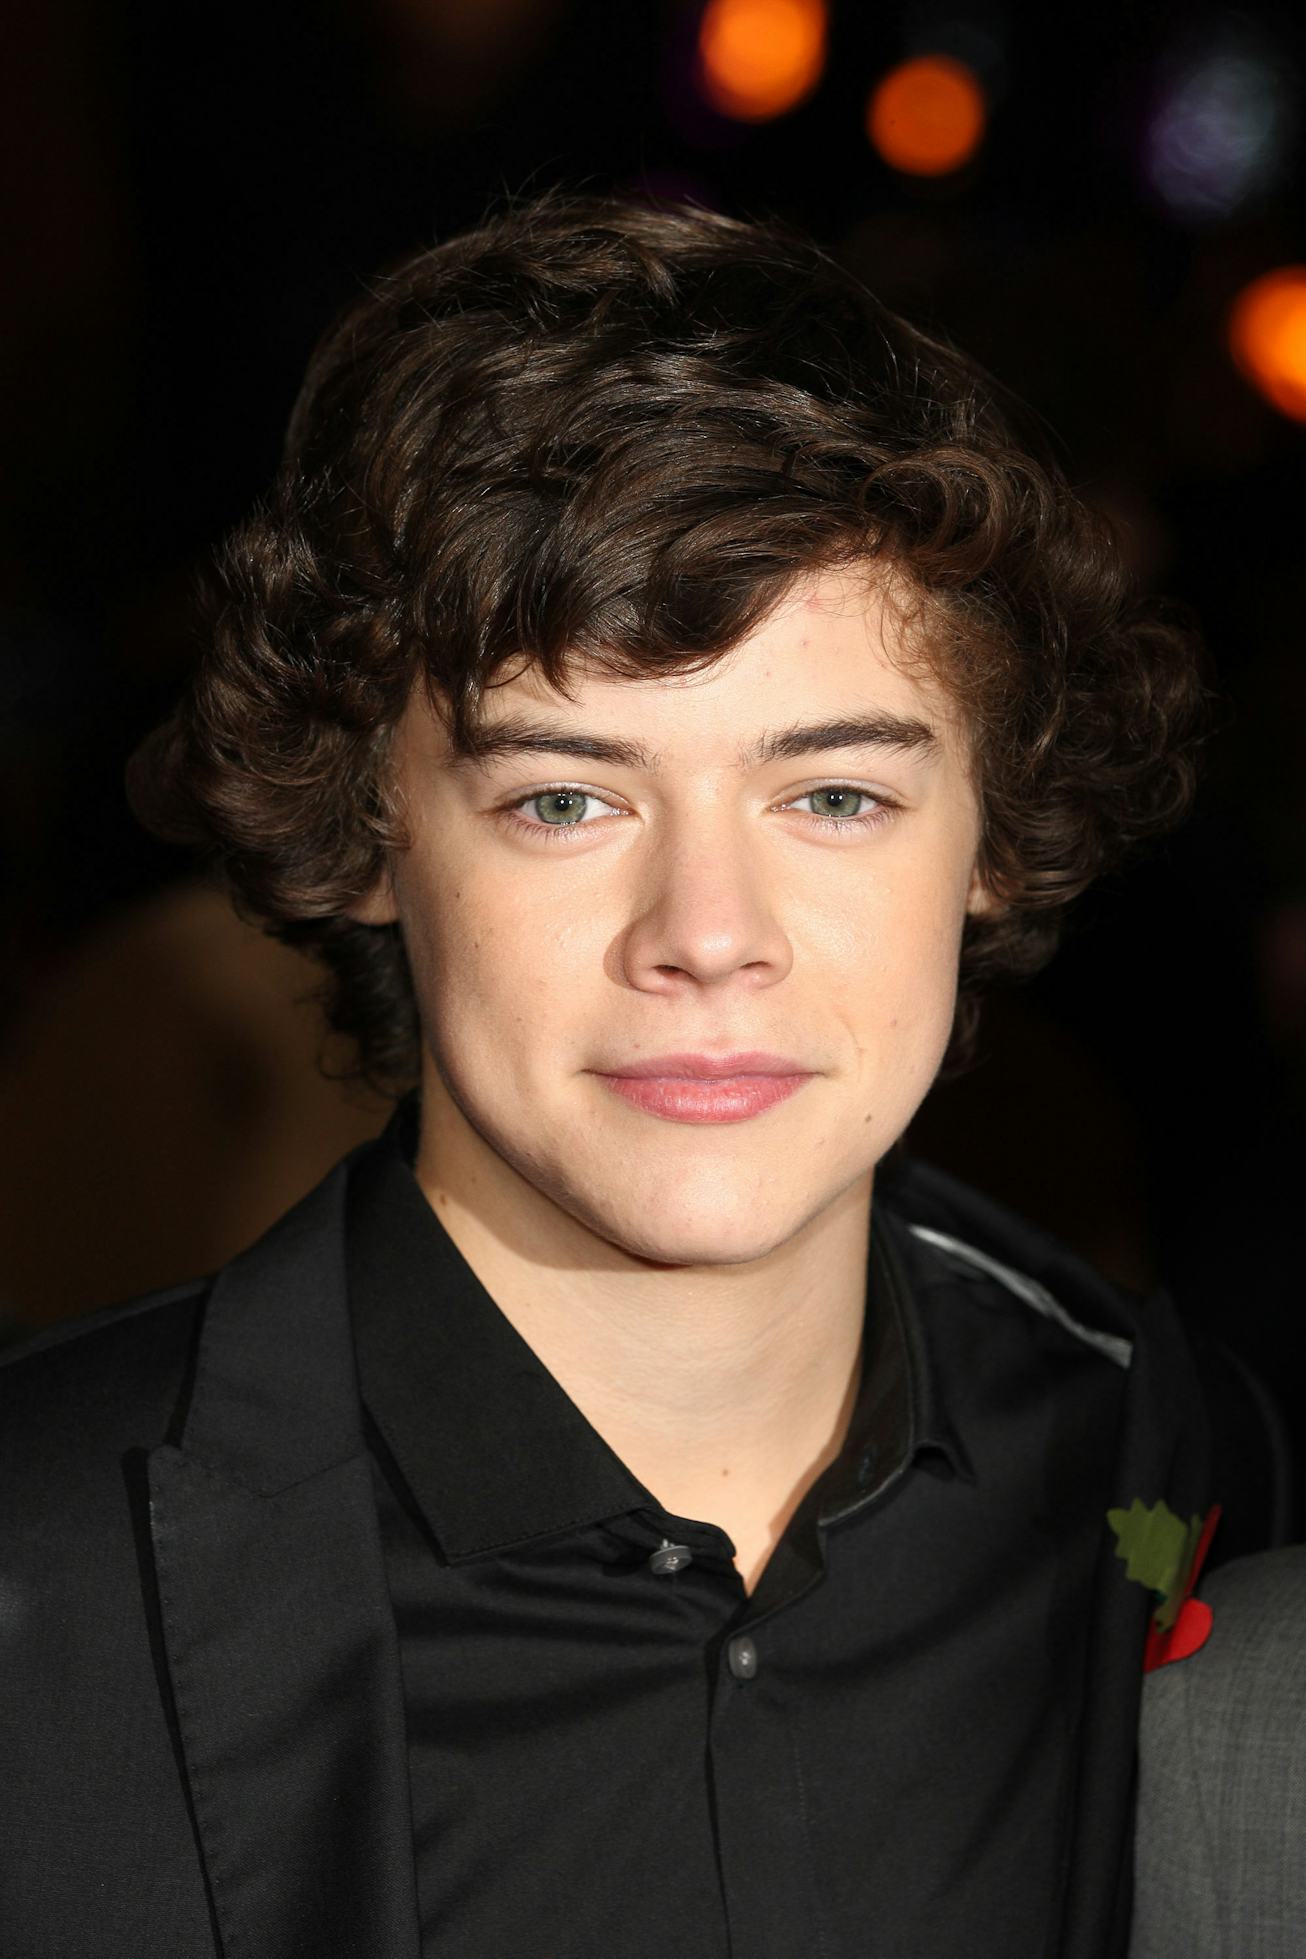 A young Harry Styles wears a black button down top with curly hair